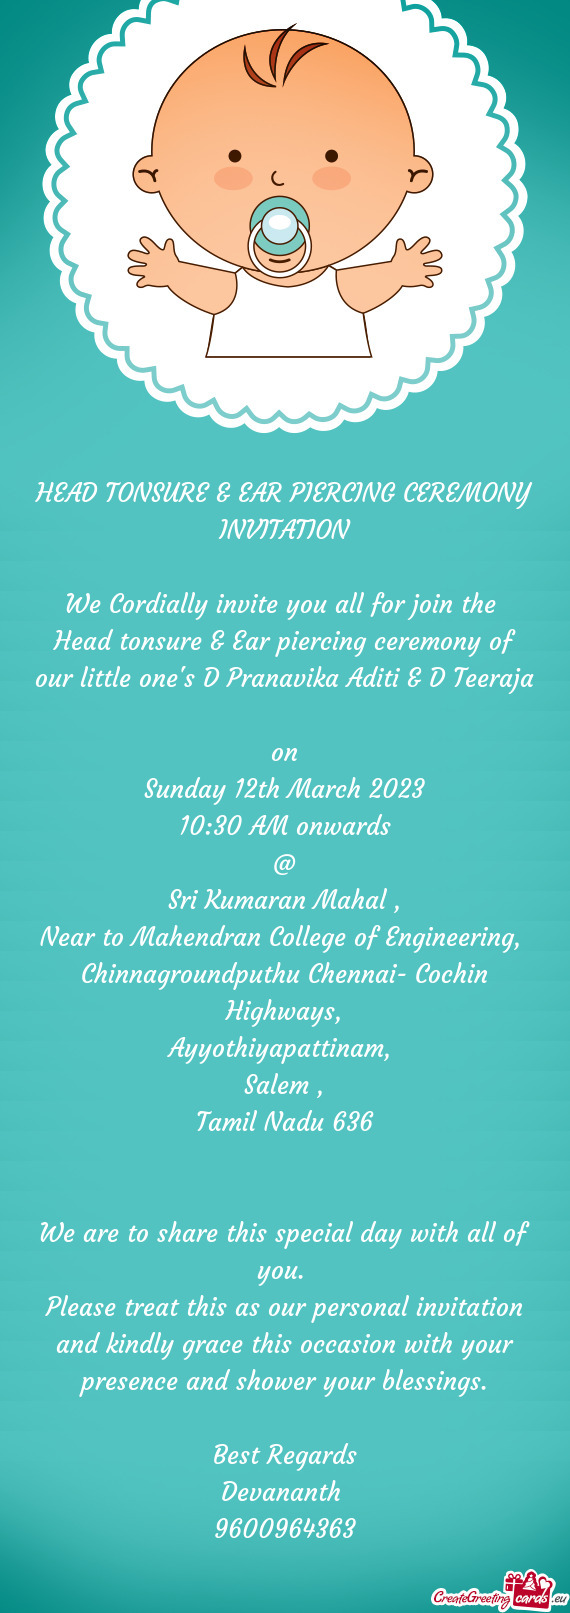 We Cordially invite you all for join the Head tonsure & Ear piercing ceremony of our little one